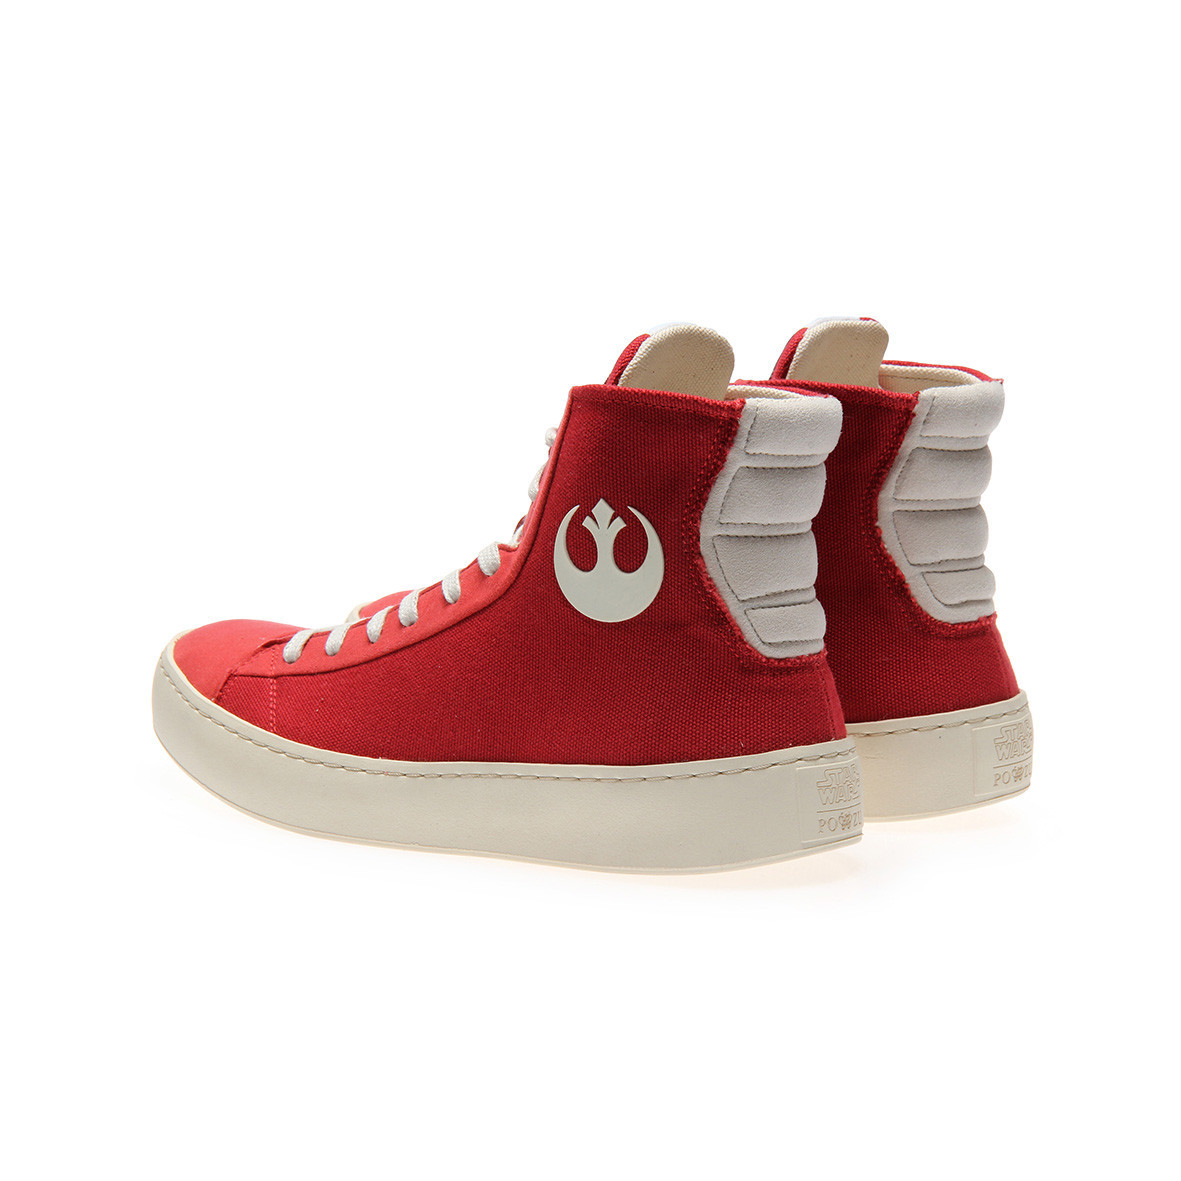 Po-Zu x Star Wars women's The Force Awakens Resistance sneakers (red version)